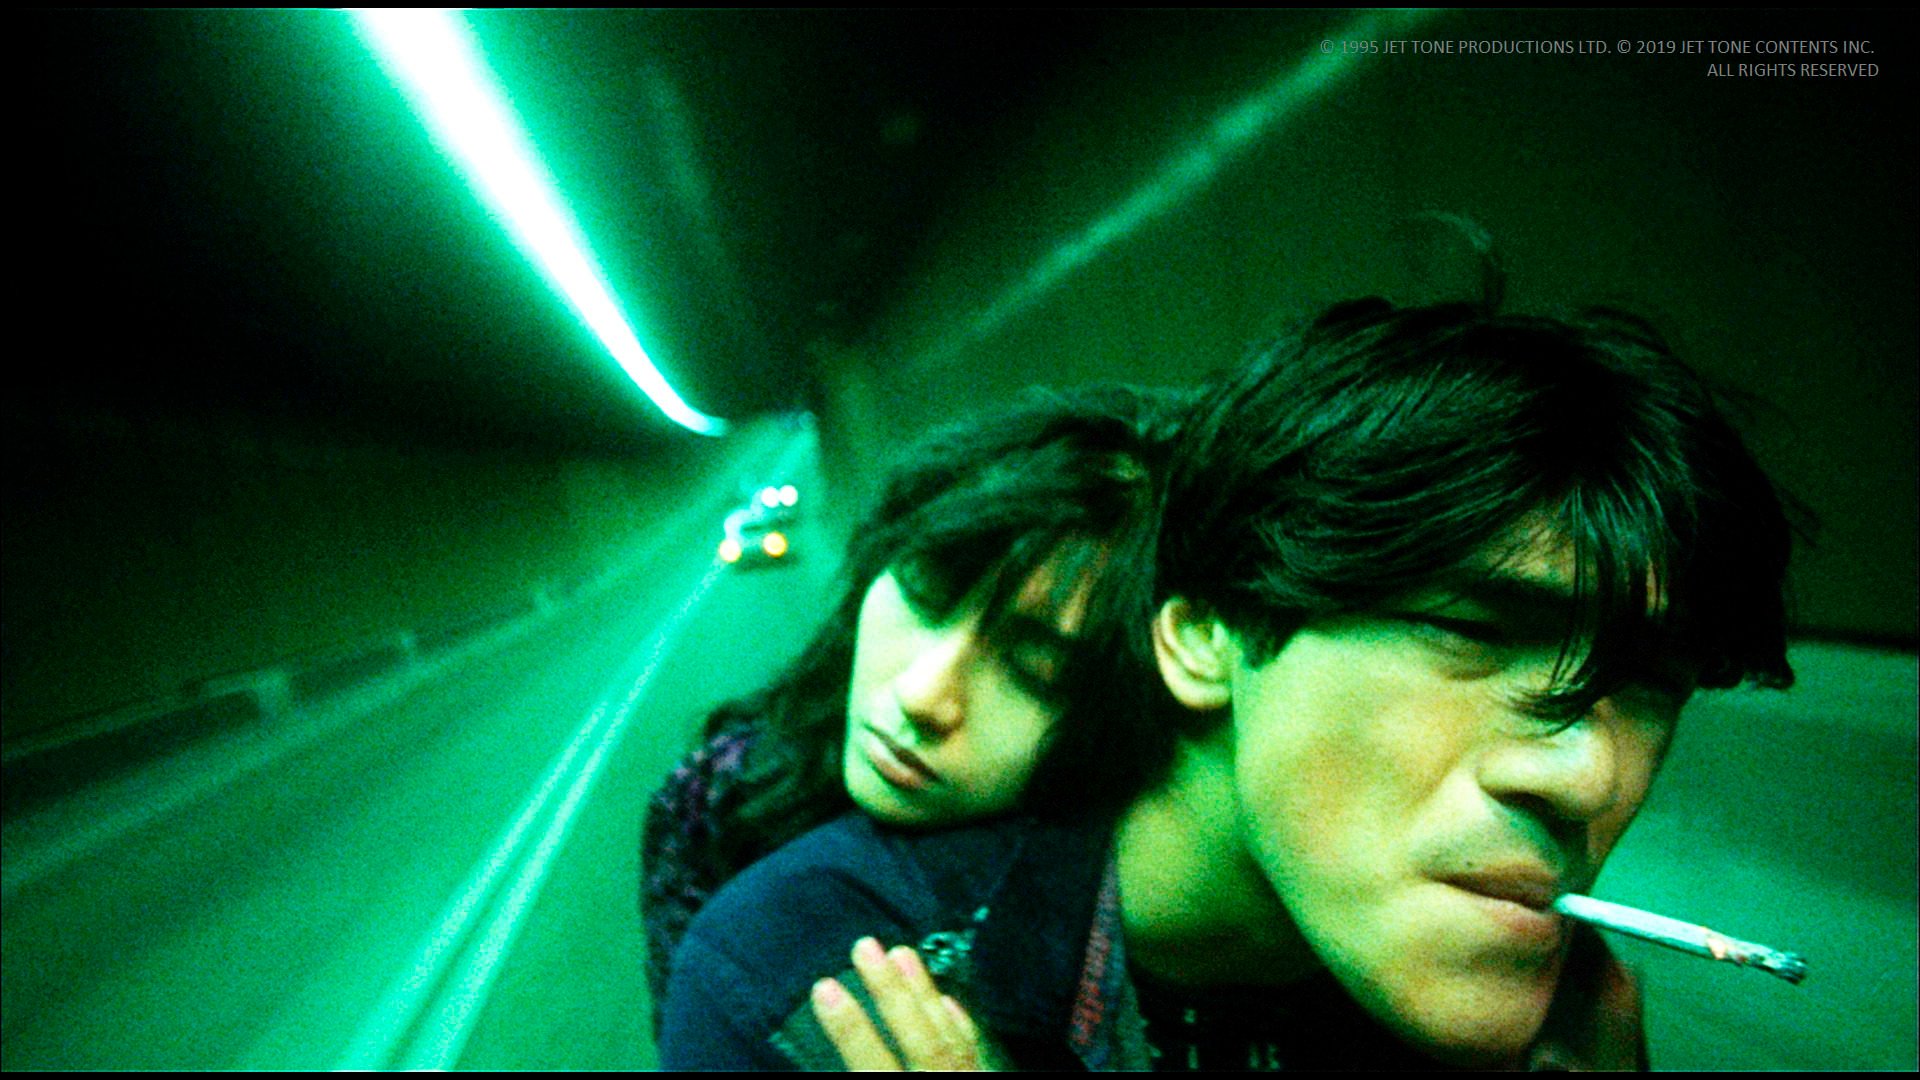 Michele Reis and Takeshi Kaneshiro in a still from Wong Kar-wai’s Fallen Angels. Photo: Block 2 Pictures and Jet Tone Contents